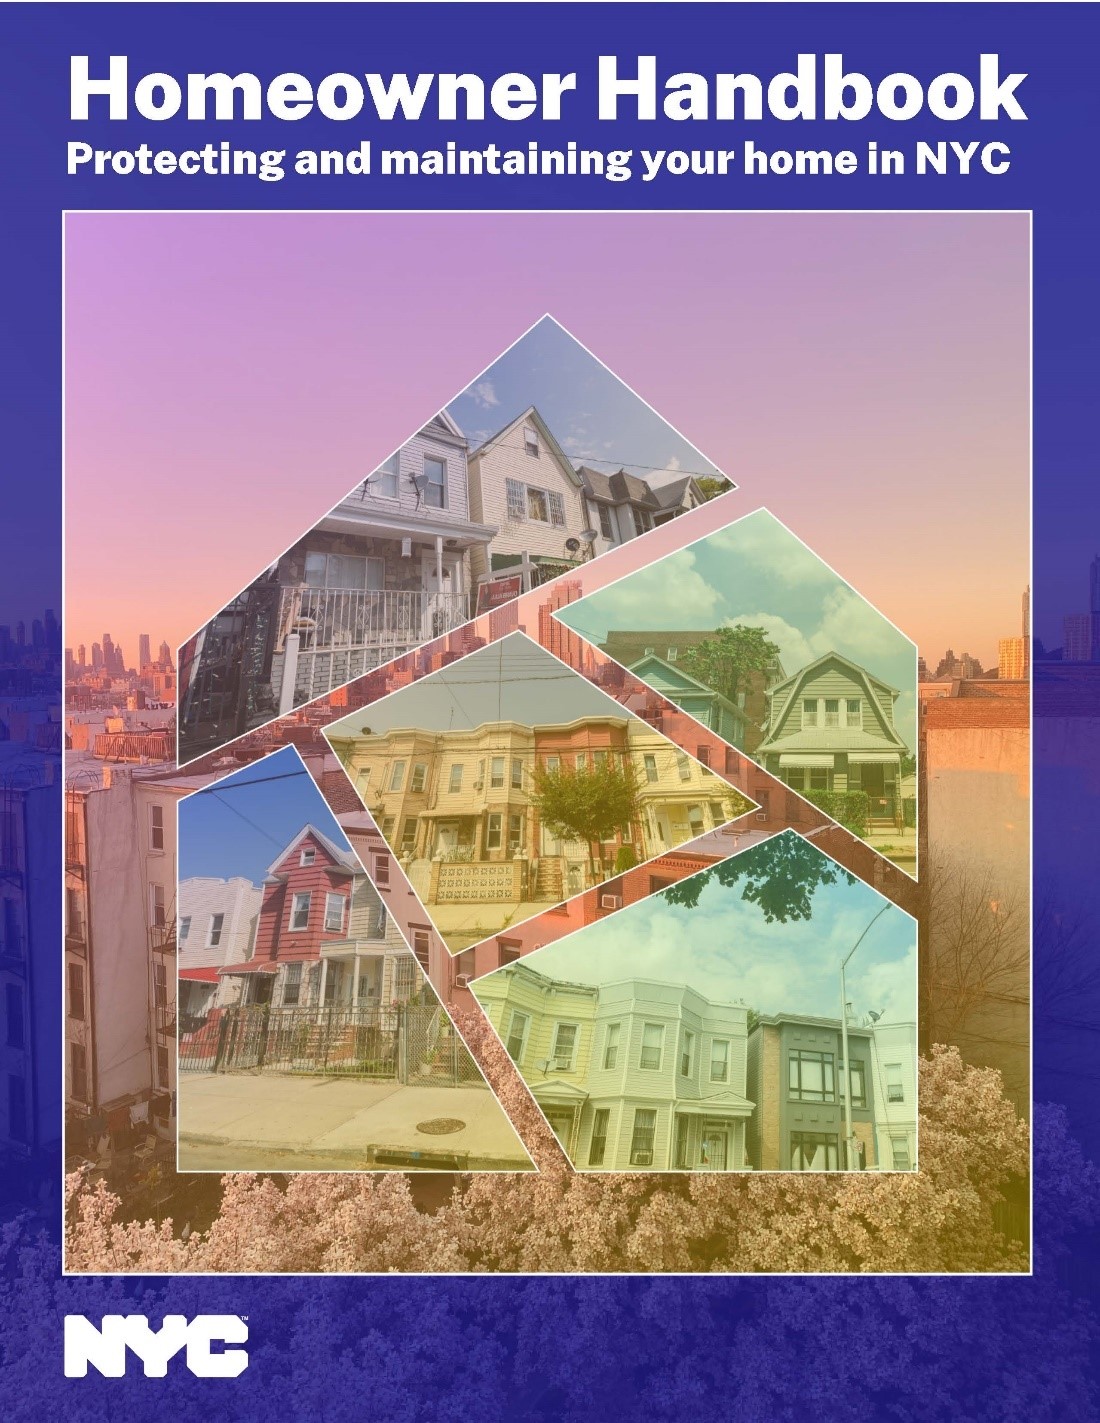 Homeowner Handbook - Protecting and maintaining you home in NYC